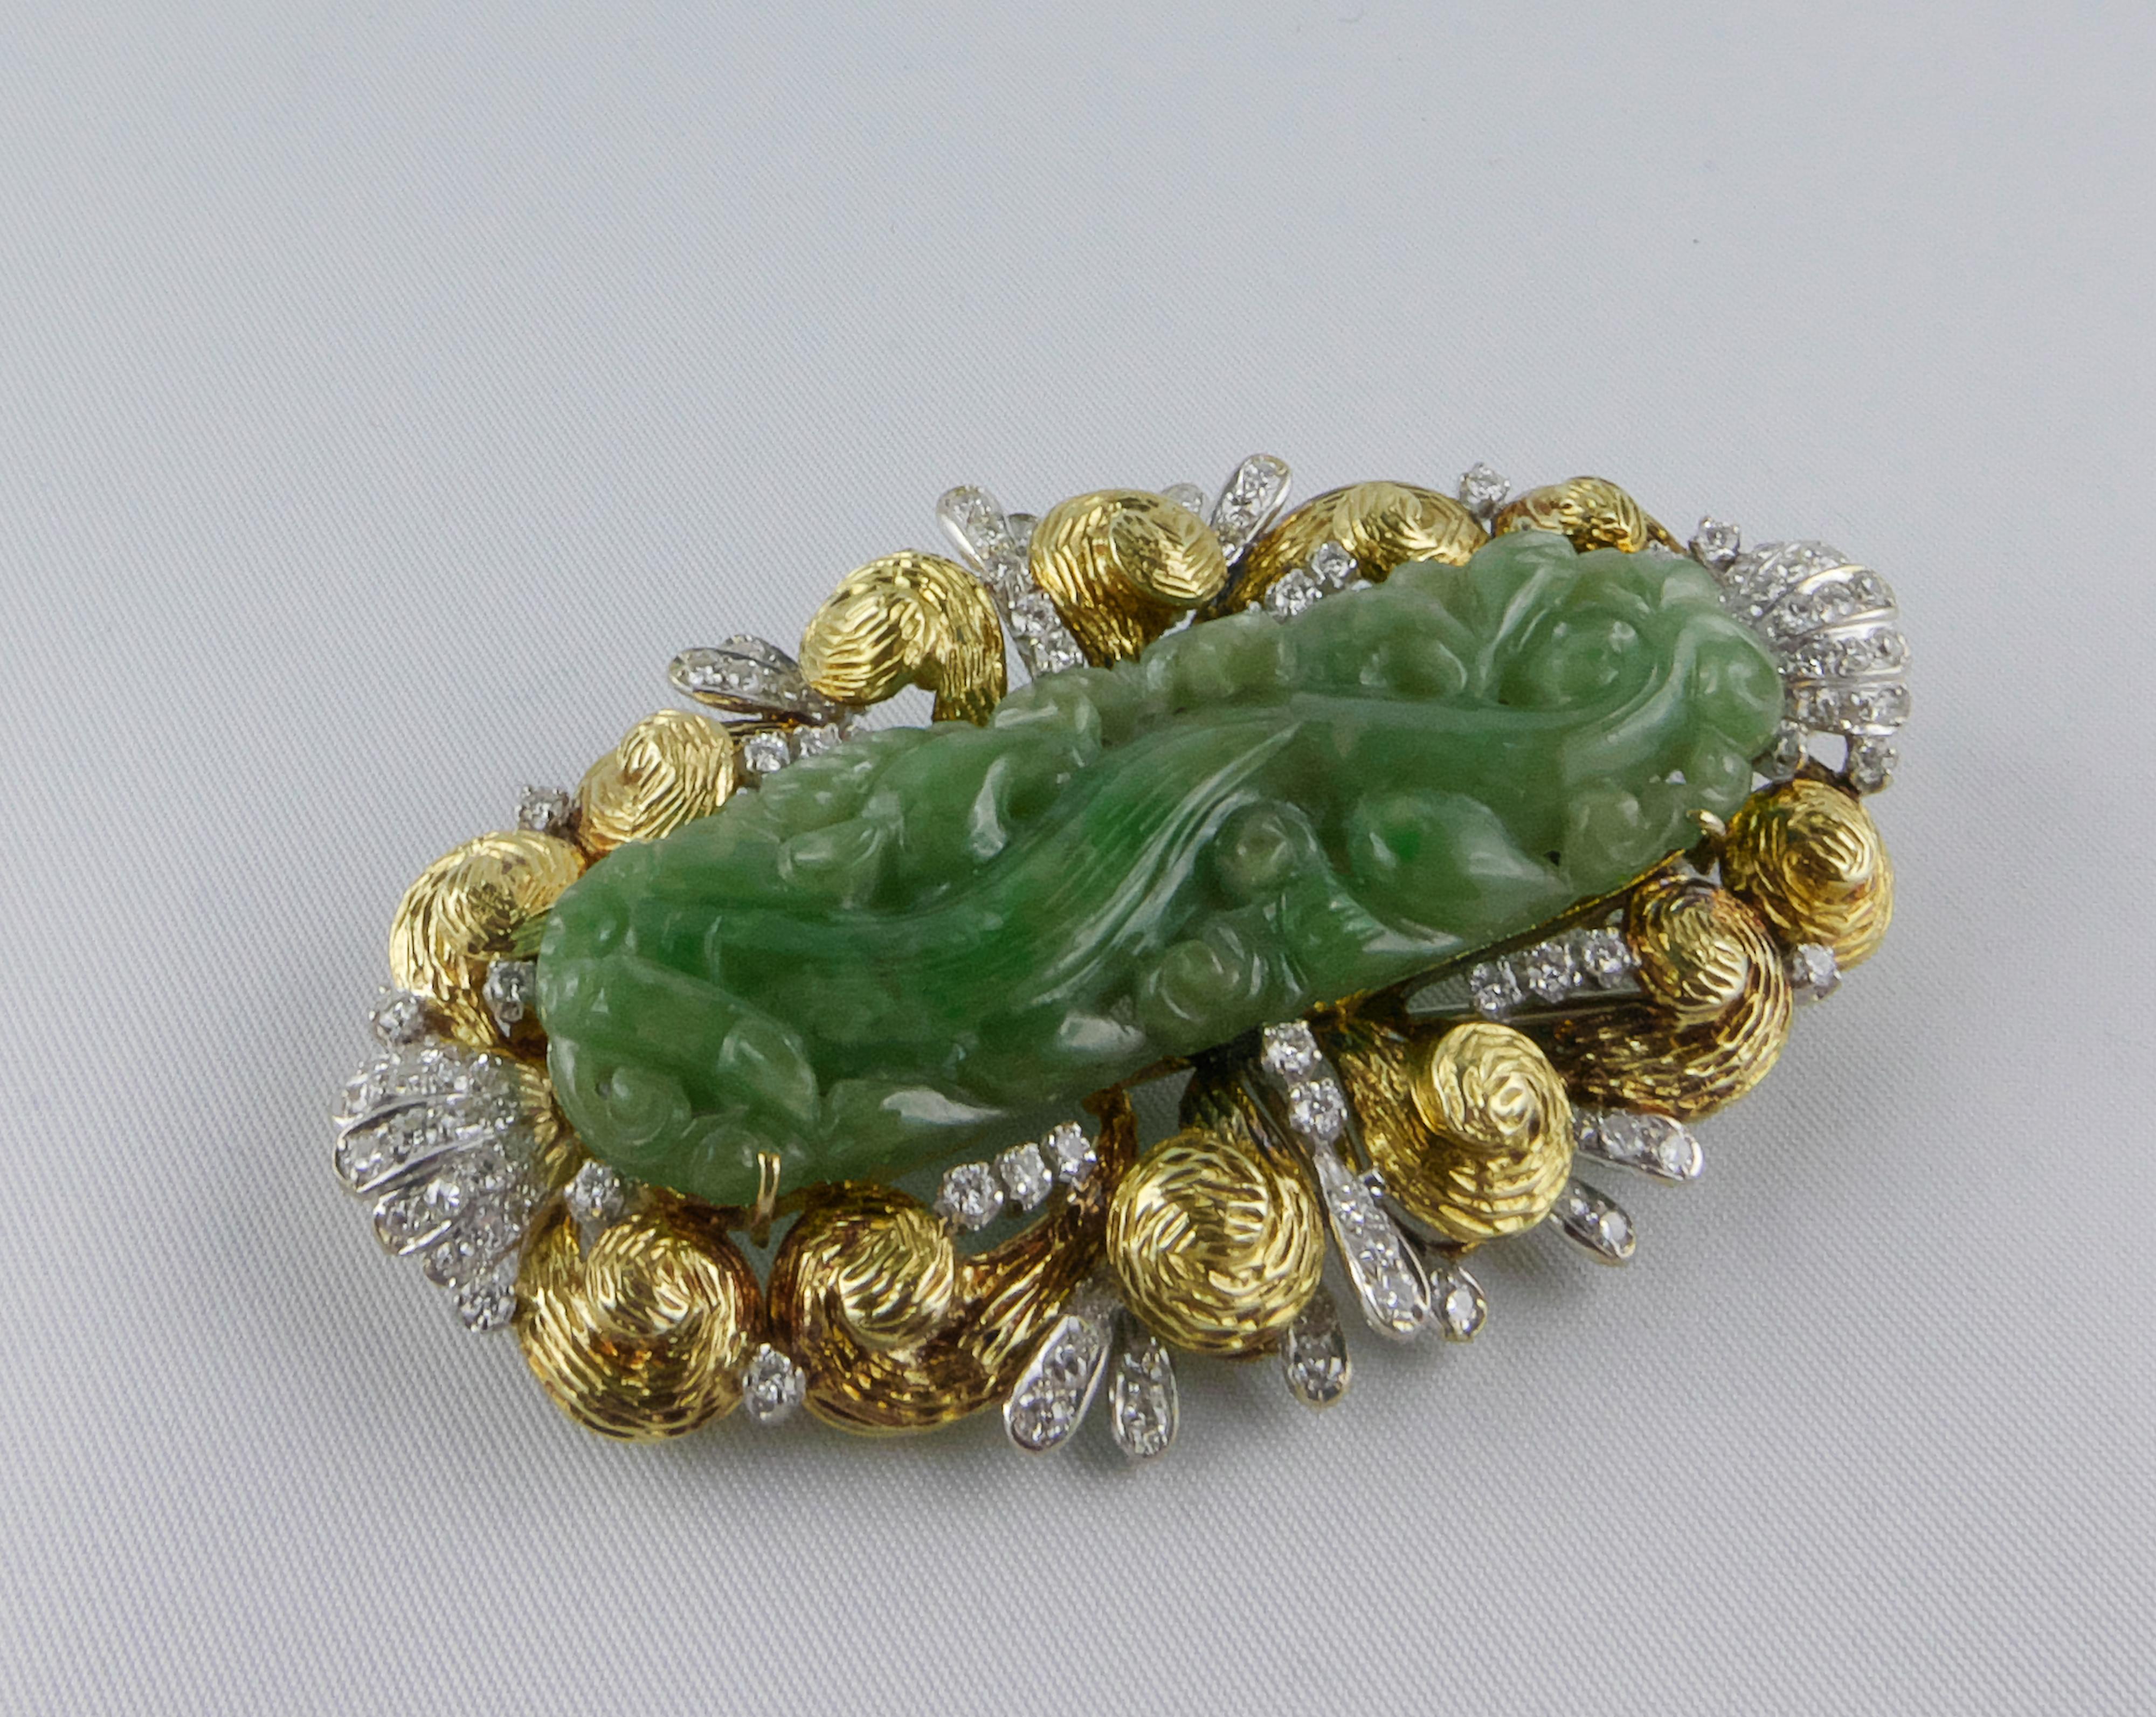 An elegant  1970s 18k Gold Brooch set with Diamonds and an intricately and beautifully hand-carved oval crafted out of a stunning piece of green Jade. The several grooves and the soft green shades of the Jade giving a three-dimensional